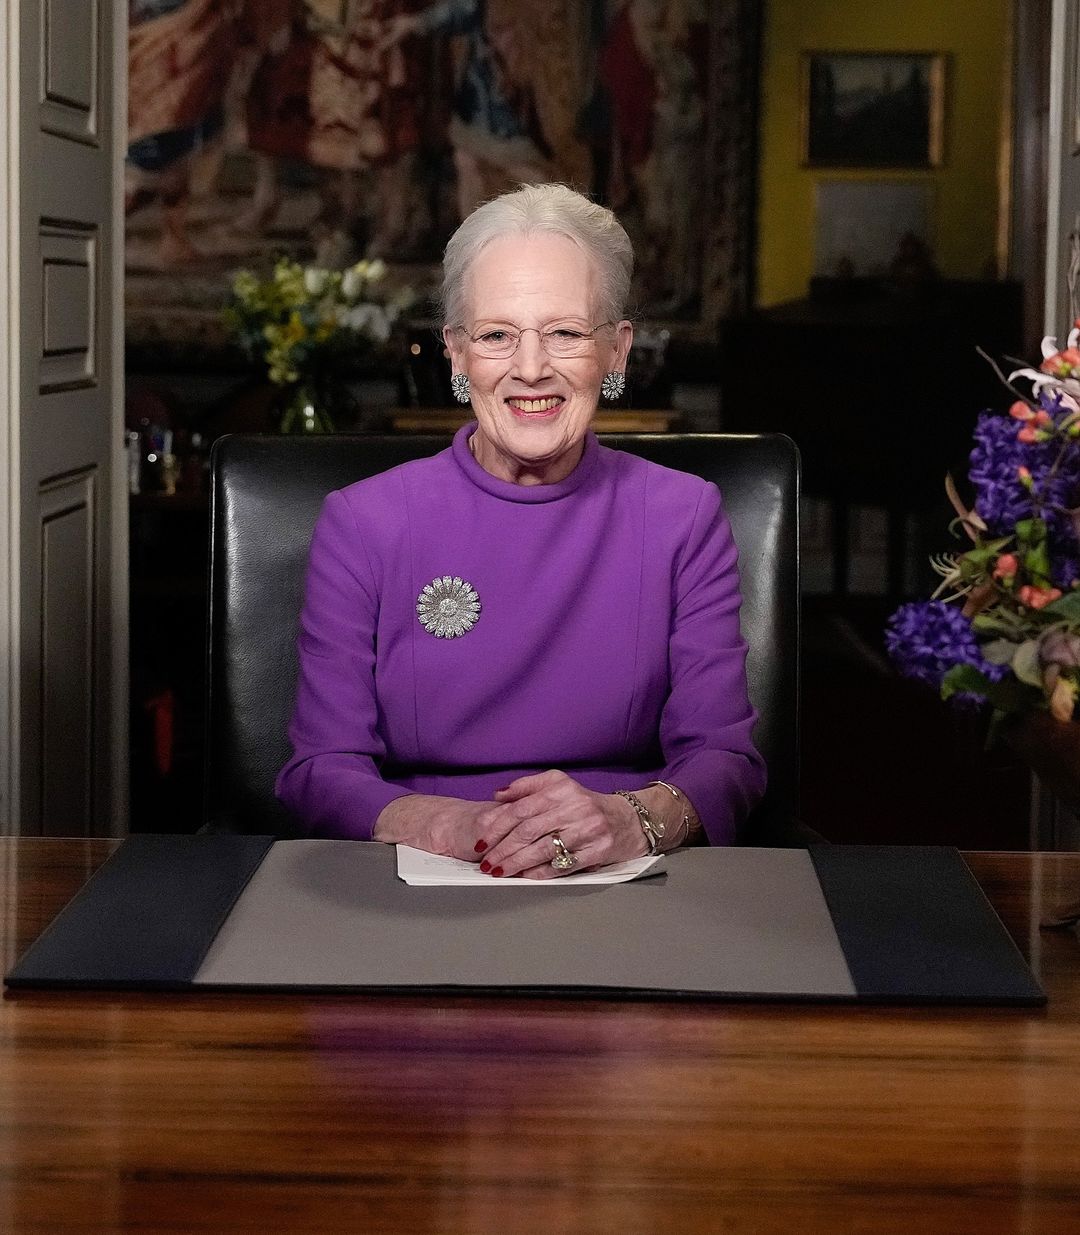 Her Majesty, Queen Margrethe II, as she announces her abdication.